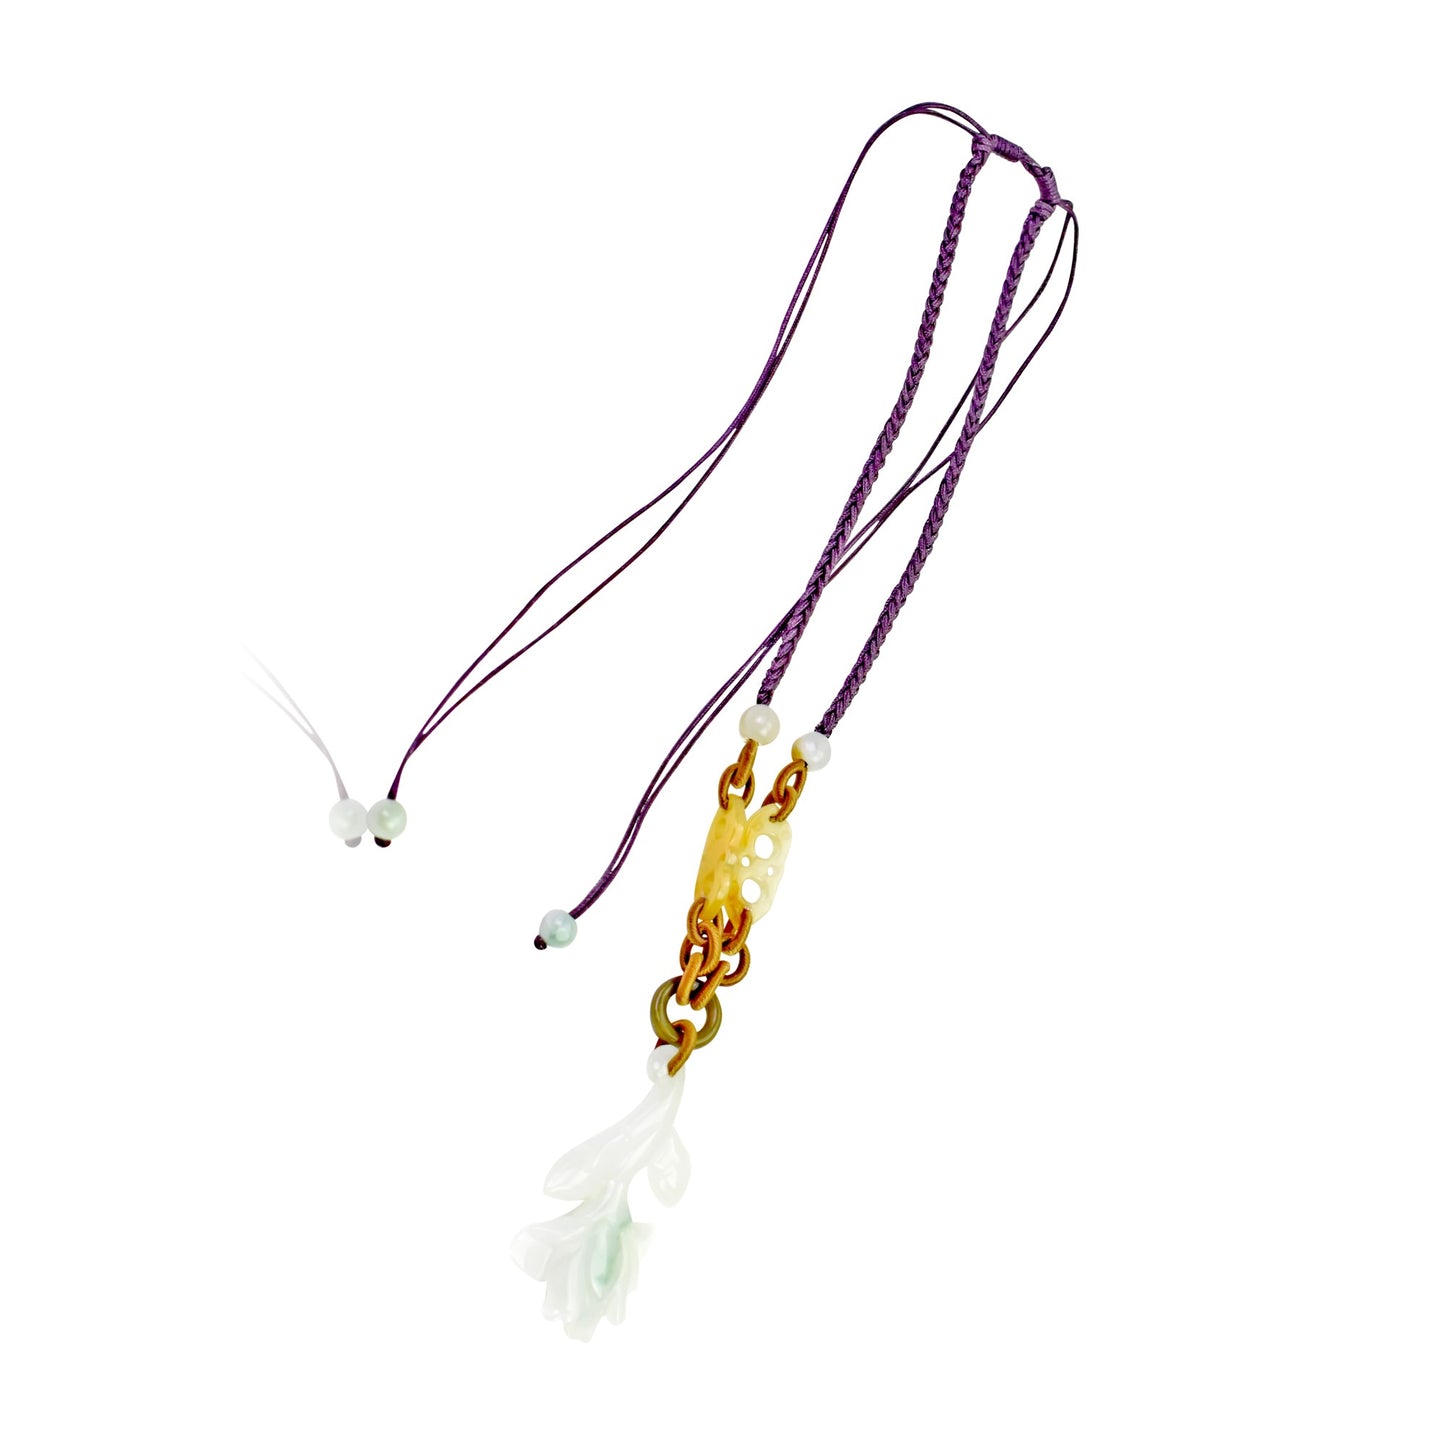 Show Your Strength and Resilience with a Protea Flower Necklace made with Brown Cord